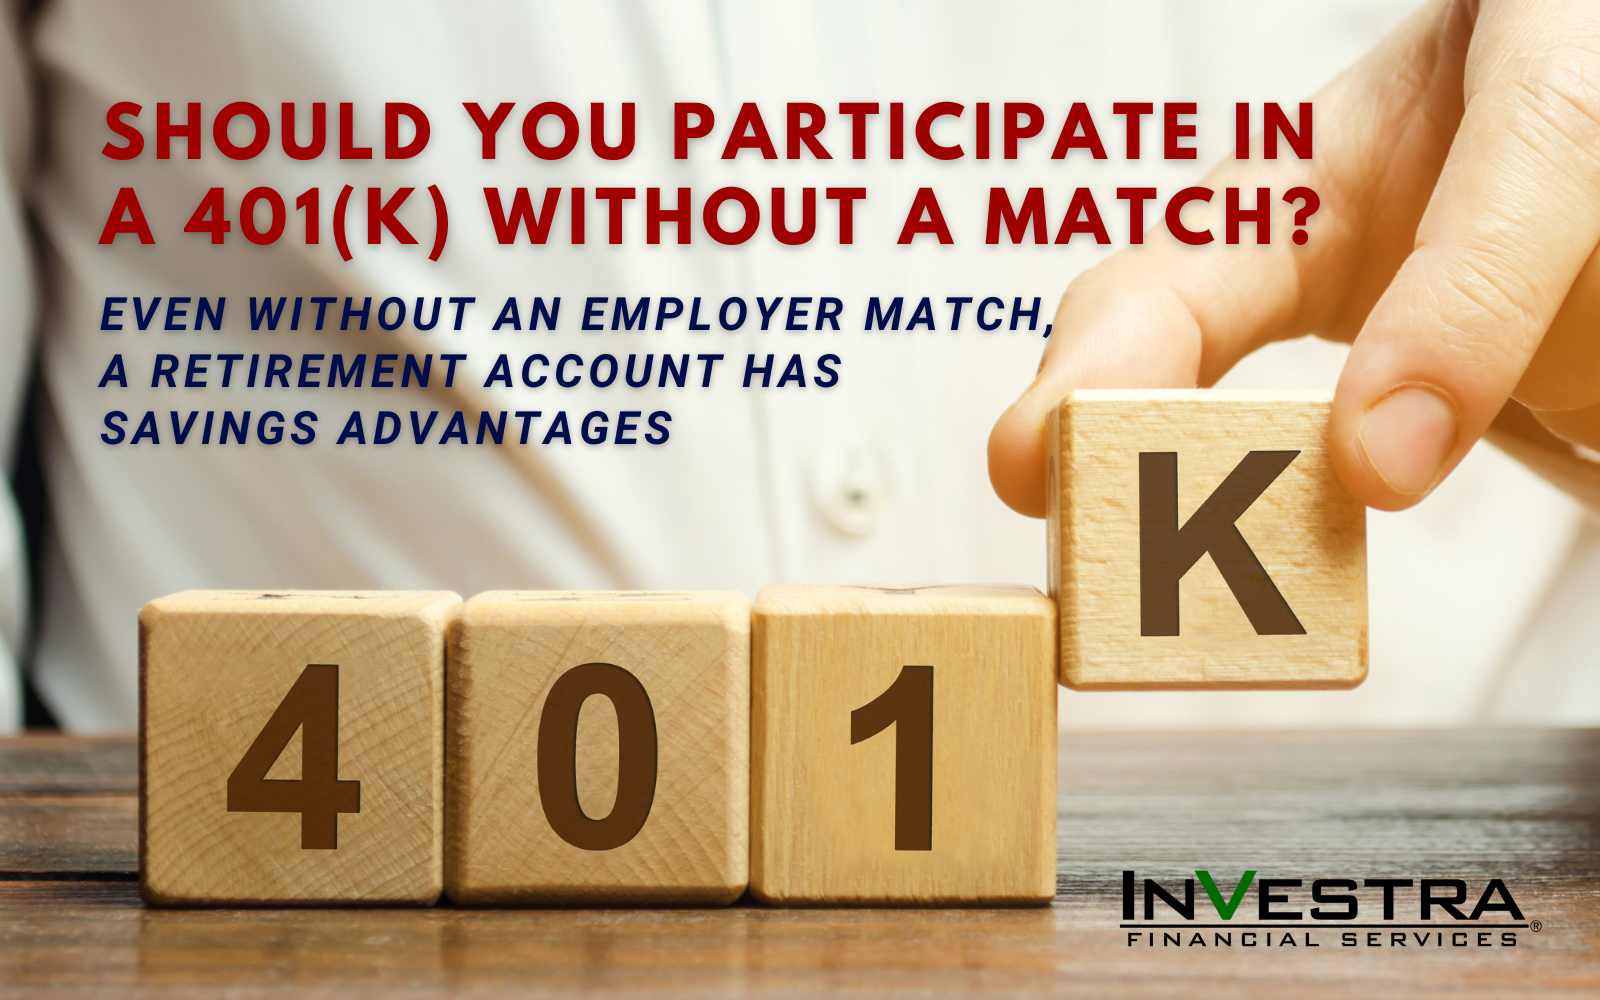 Should You Participate In A 401(k) Without A Match?